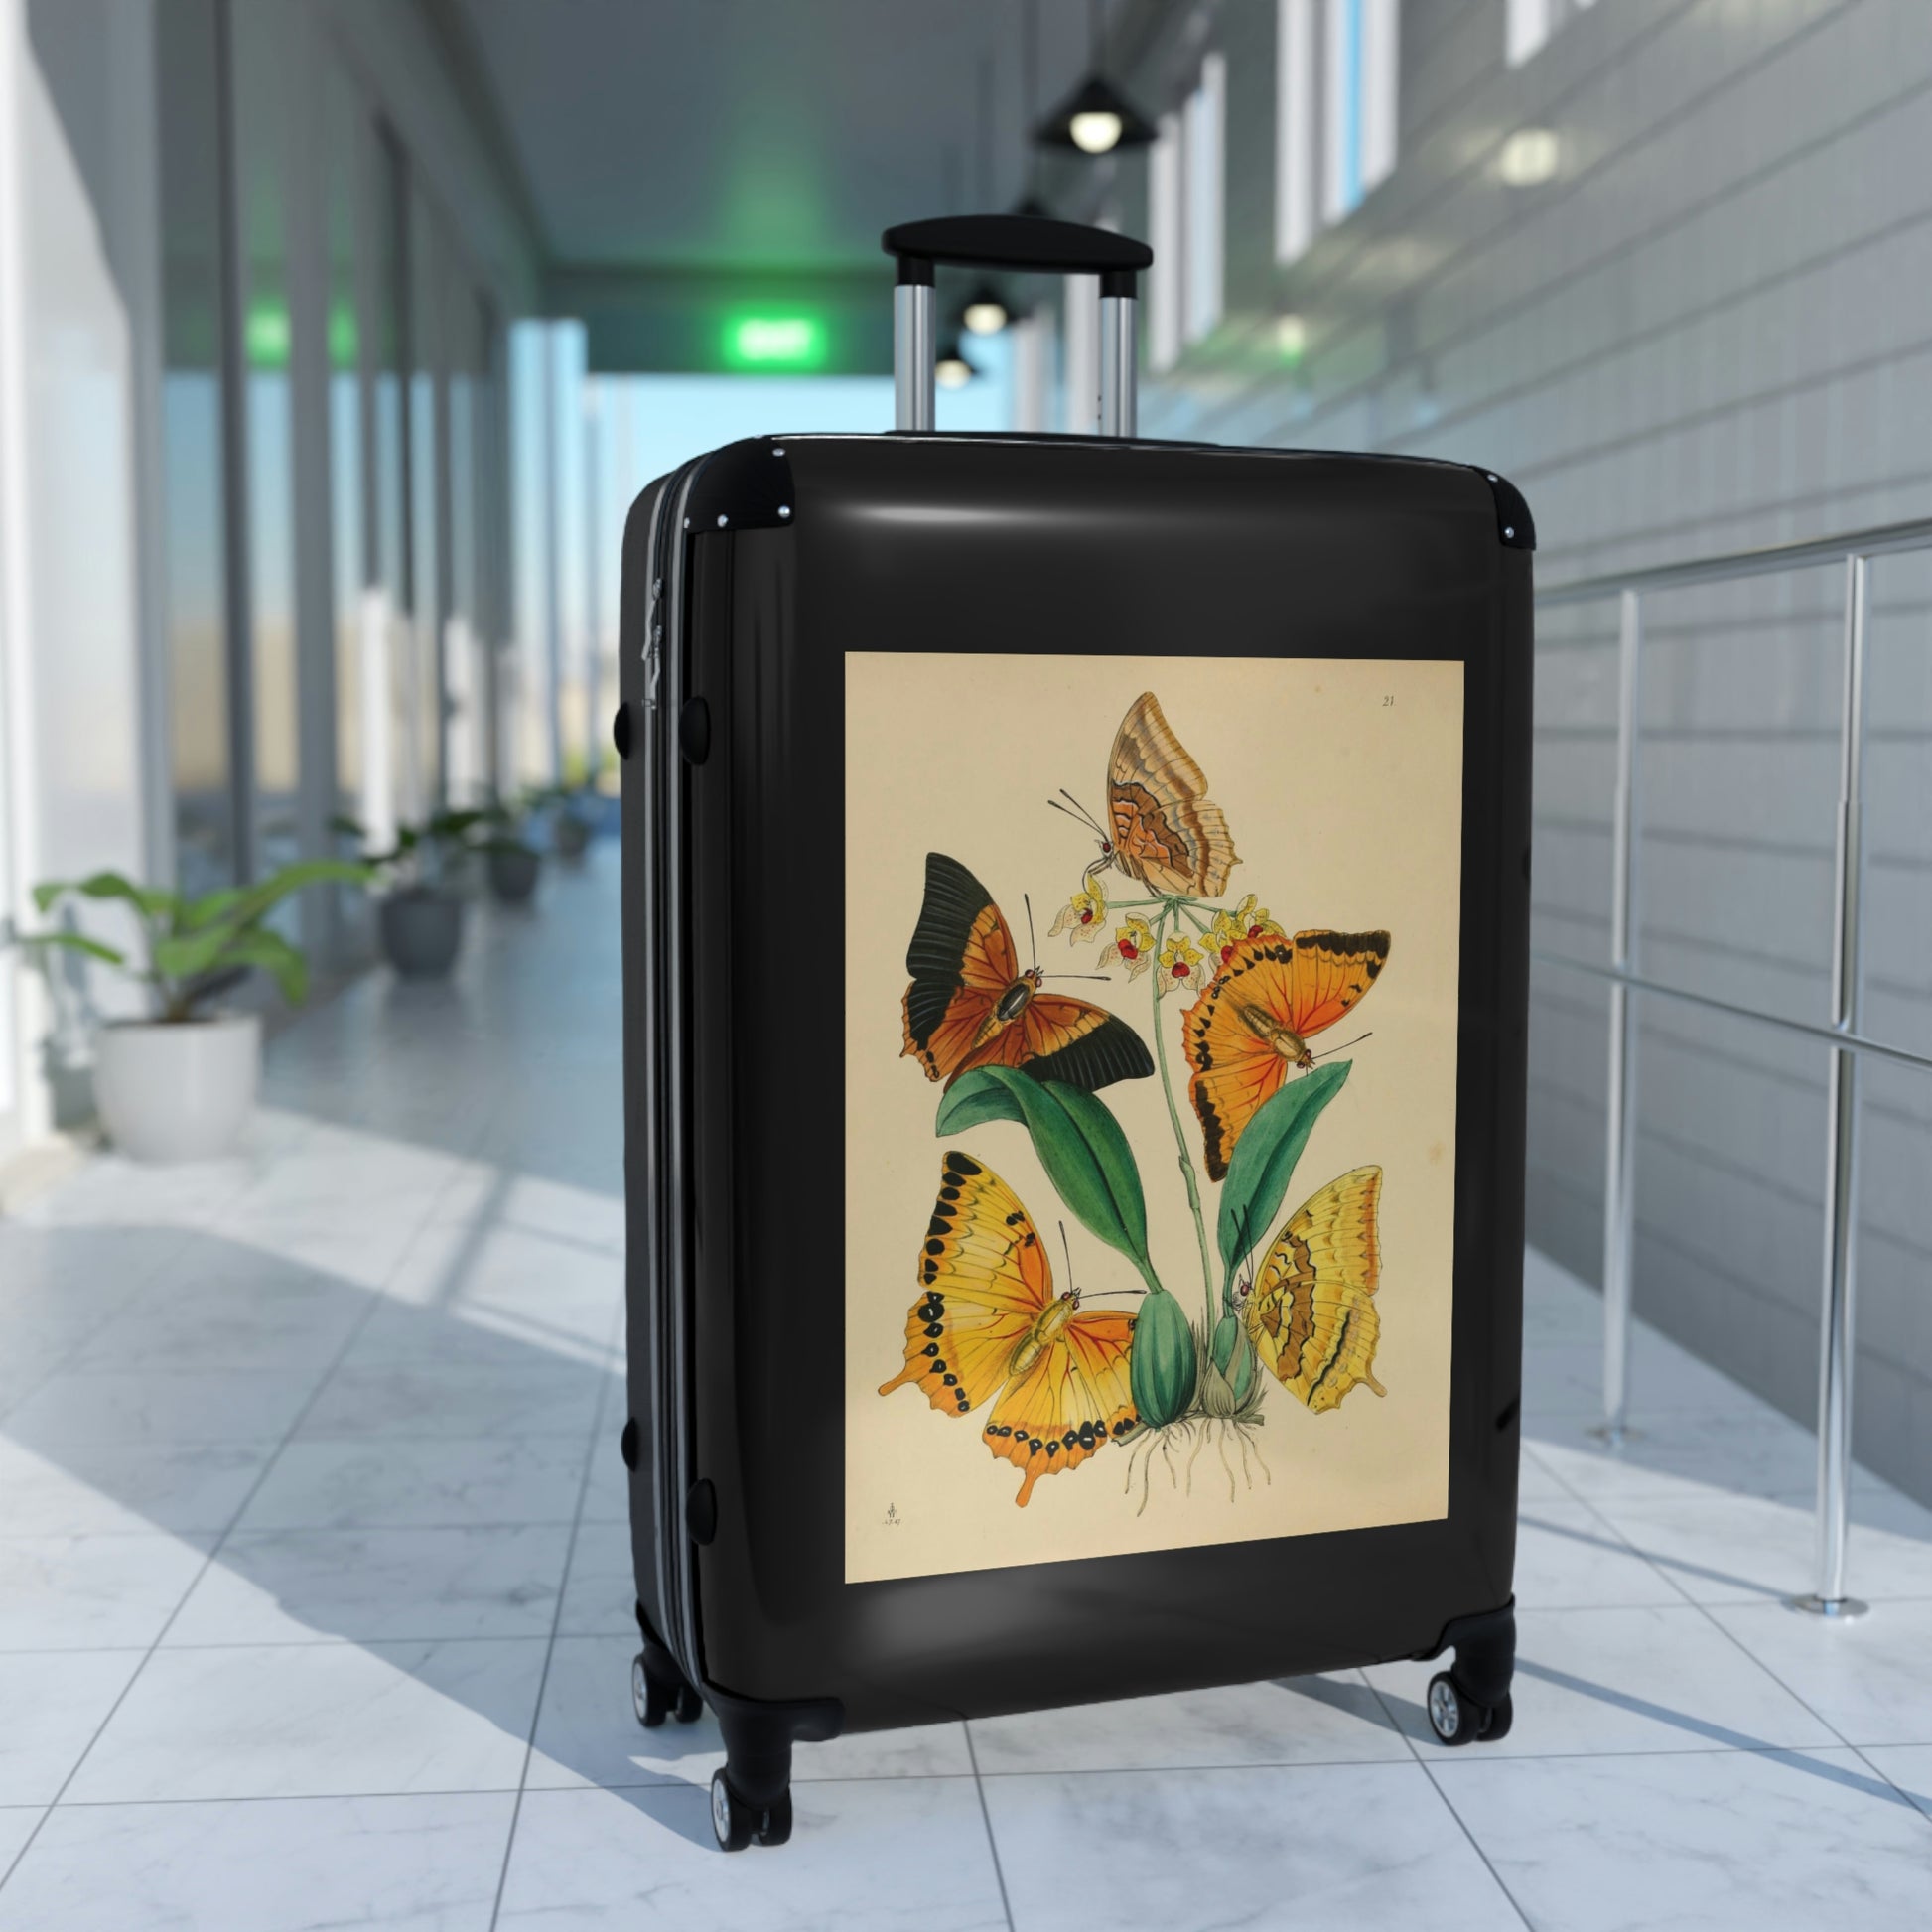 Getrott Butterflies Macrolepidopteran Rhopalocera Yellow Lepidoptera Cabin Suitcase Rolling Luggage Inner Pockets Extended Storage Adjustable Telescopic Handle Inner Pockets Double wheeled Polycarbonate Hard-shell Built-in Lock